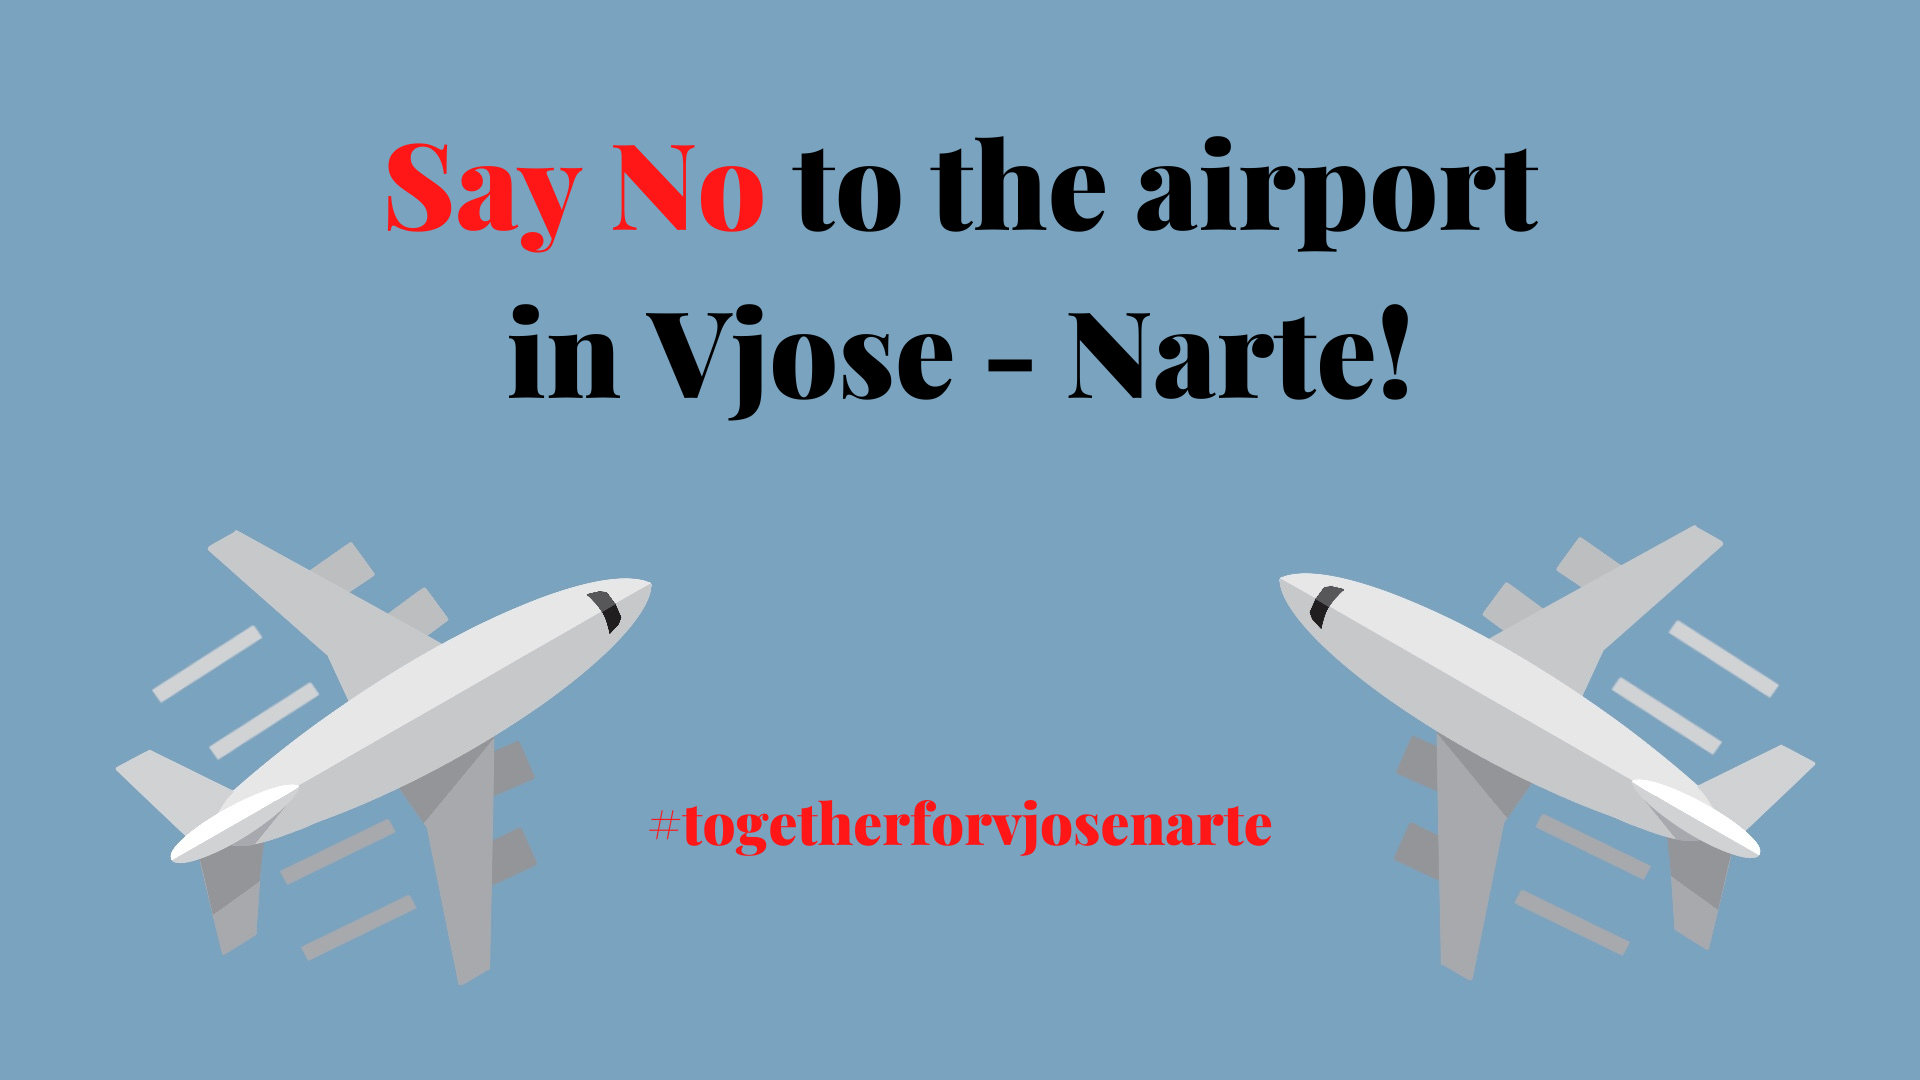 Vjose-Narte: From a natural paradise to a destructive factory for the environment